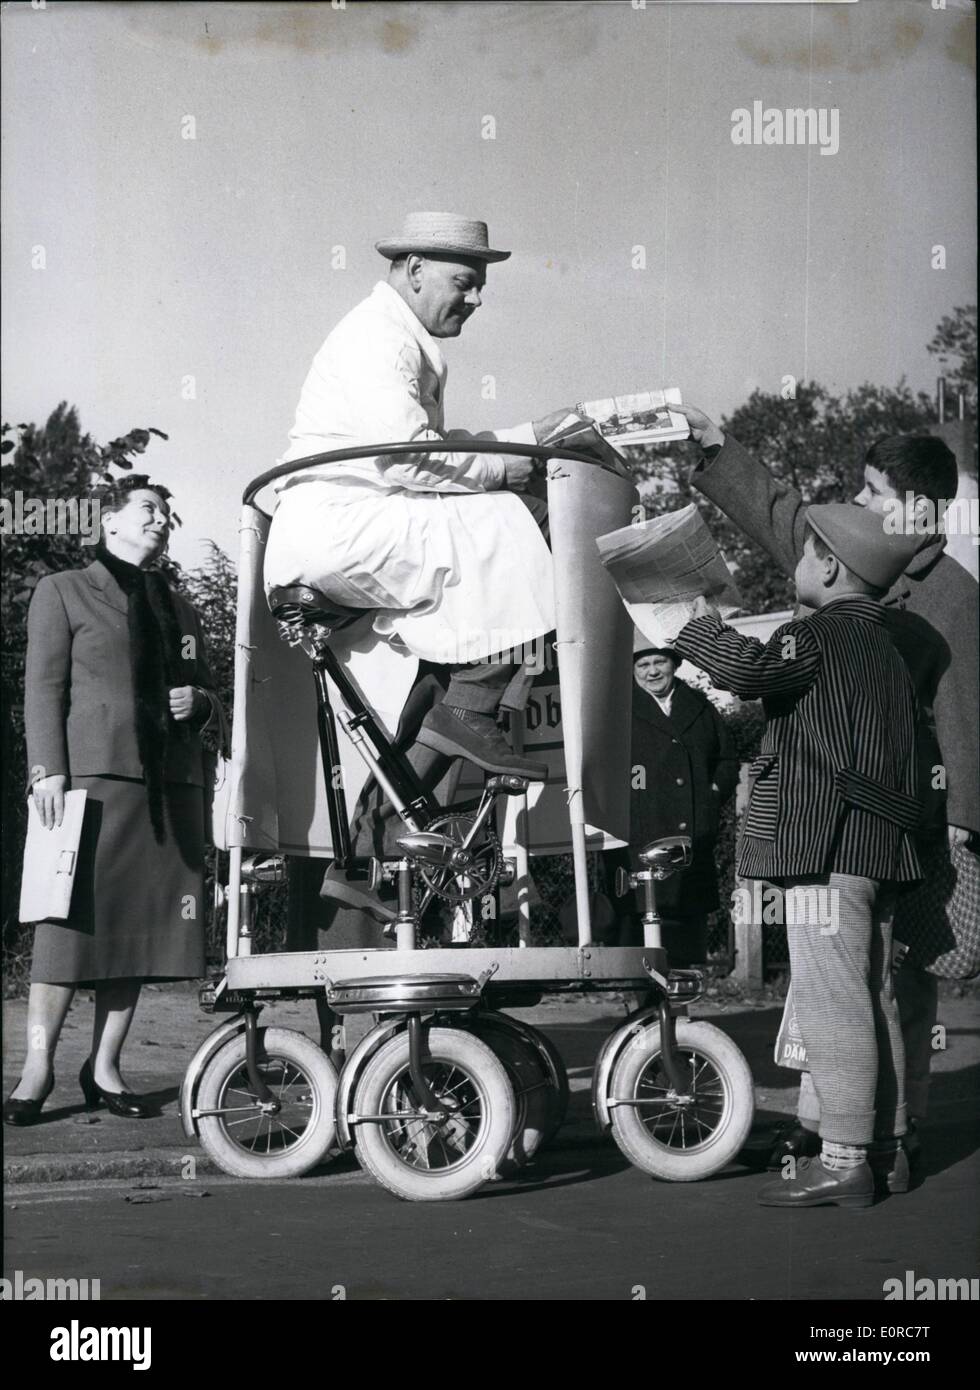 Dec. 12, 1958 - It's the right turn that matters: Ernst Schroeder from Hamburg has had taken a patent for it. This unusual vehicle has been developed by him and is now a spectacle in Hamburg. ''Rotoped'' he calls this rolling stall for news papers with five wheels. The wheel in the middle transfers the driving power. All five wheels are linked for the steering movement, and because of this the driver can suddenly change his direction in a right angle (standing by 90,180, and 360 degrees). Although there is a saddle and a pedal as there is on a bicycle, the vehicle has no steering wheel Stock Photo